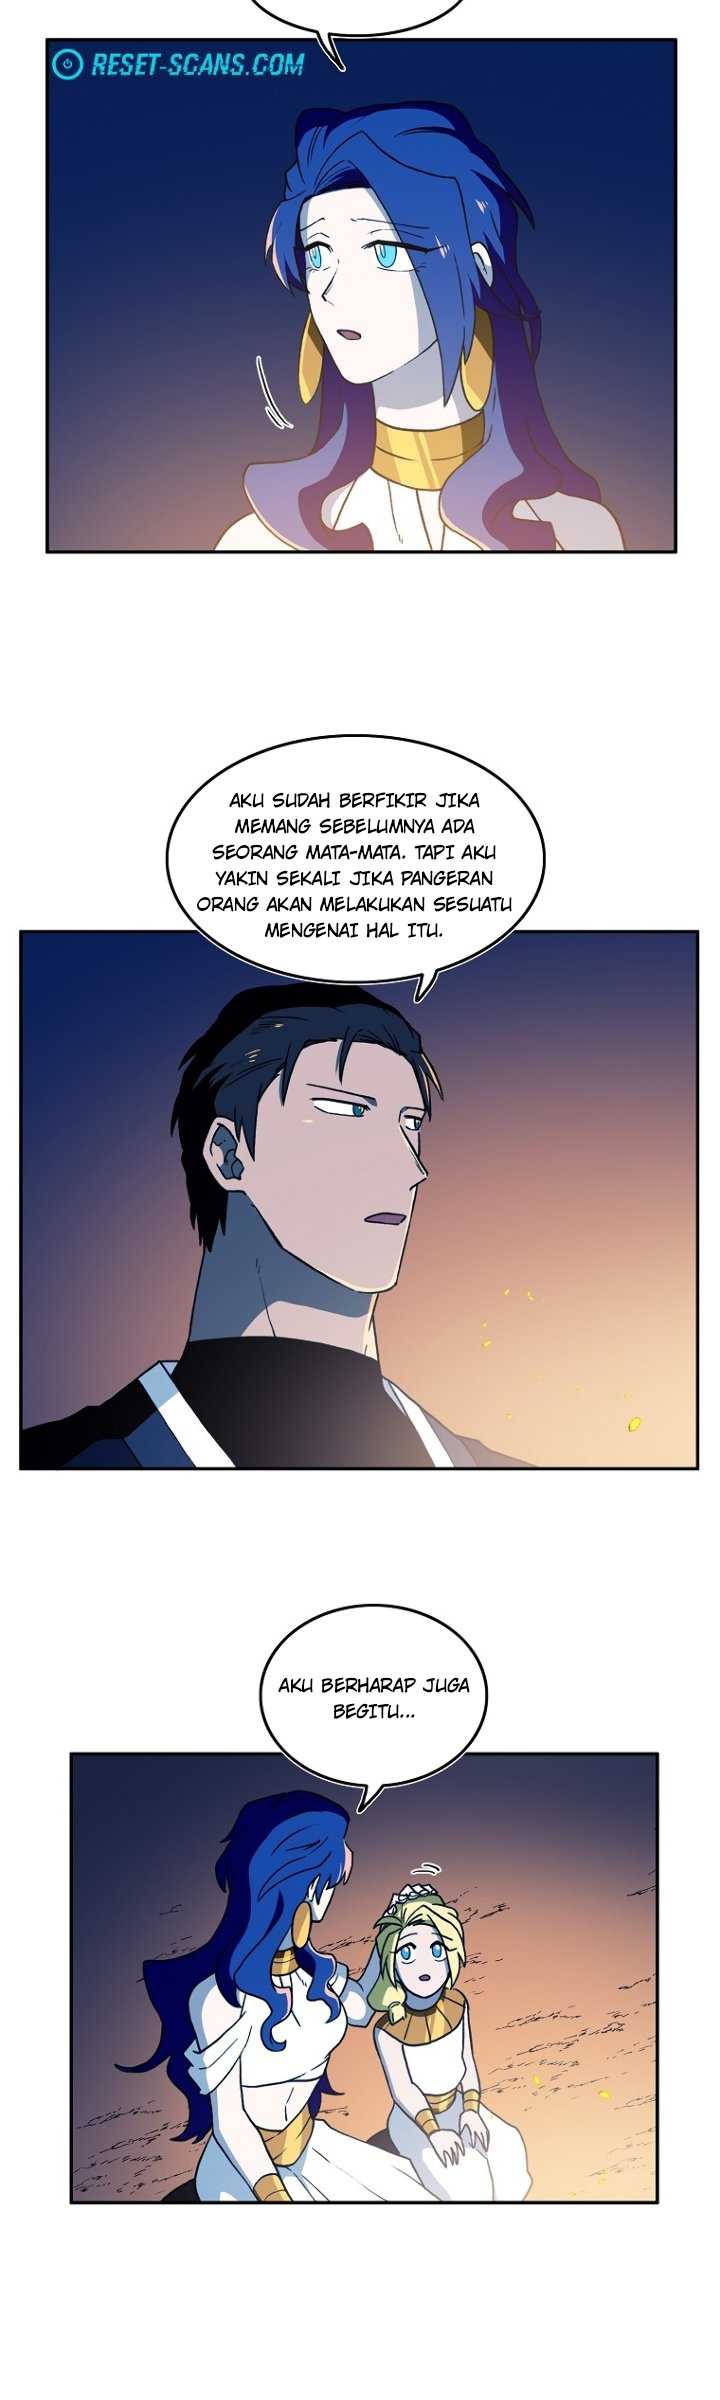 Magical Shooting Sniper Of Steel Chapter 26